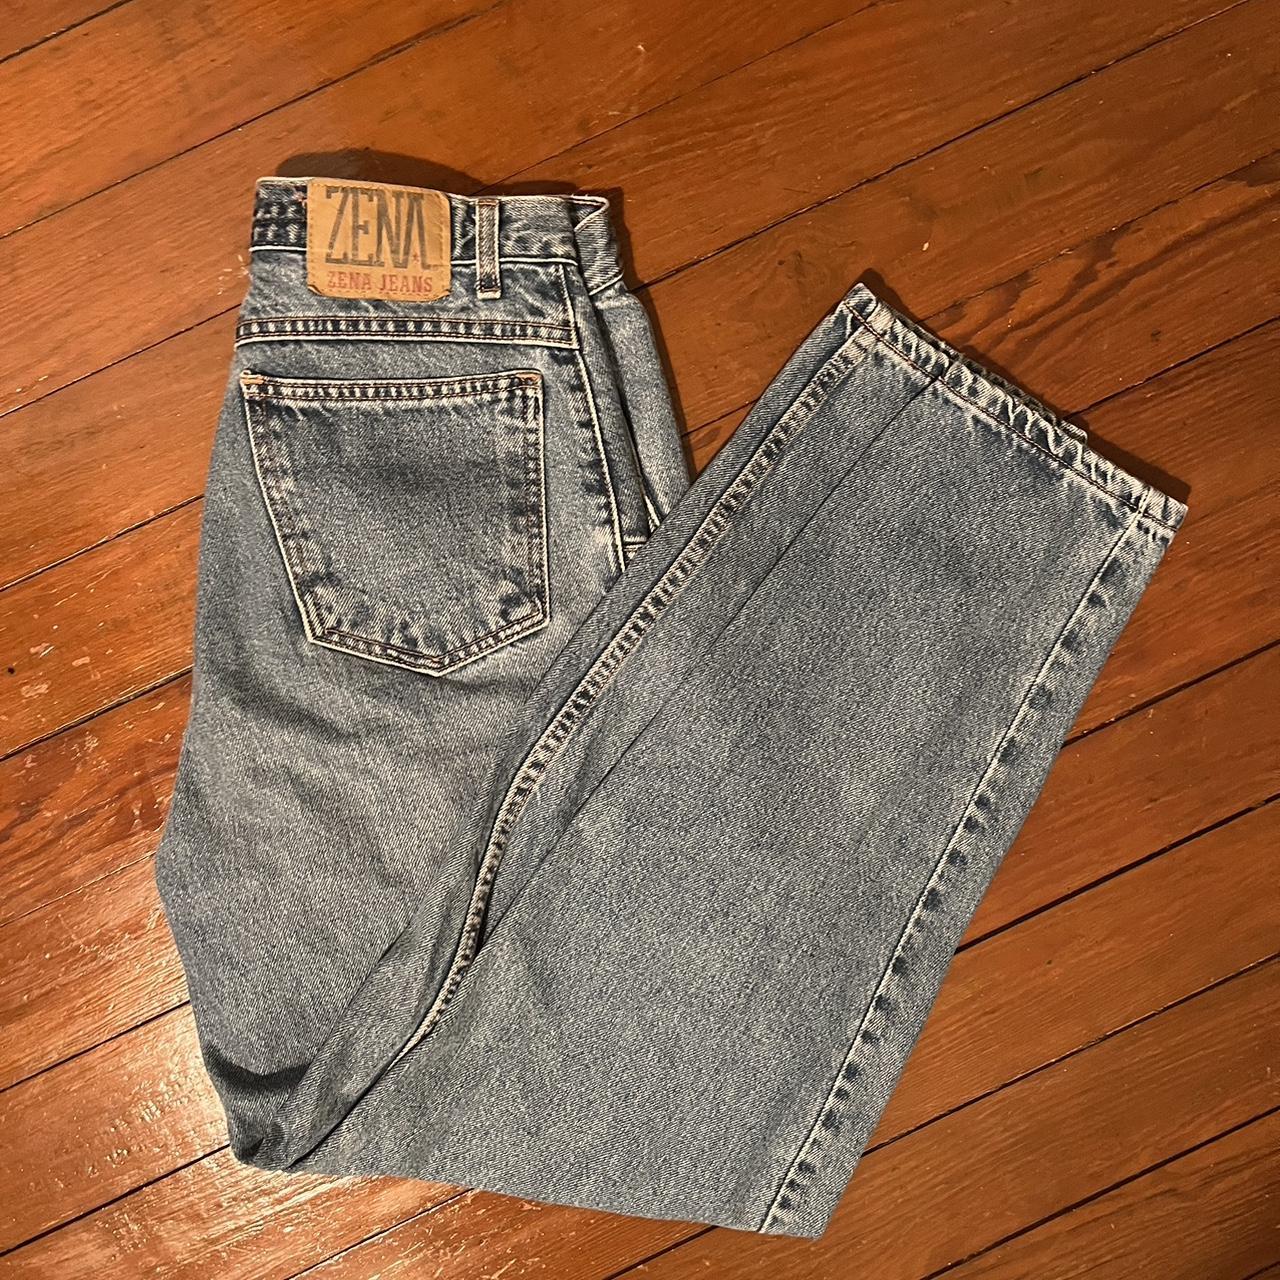 Vintage Zena jeans Tag says size 12 but fit around an 8 - Depop